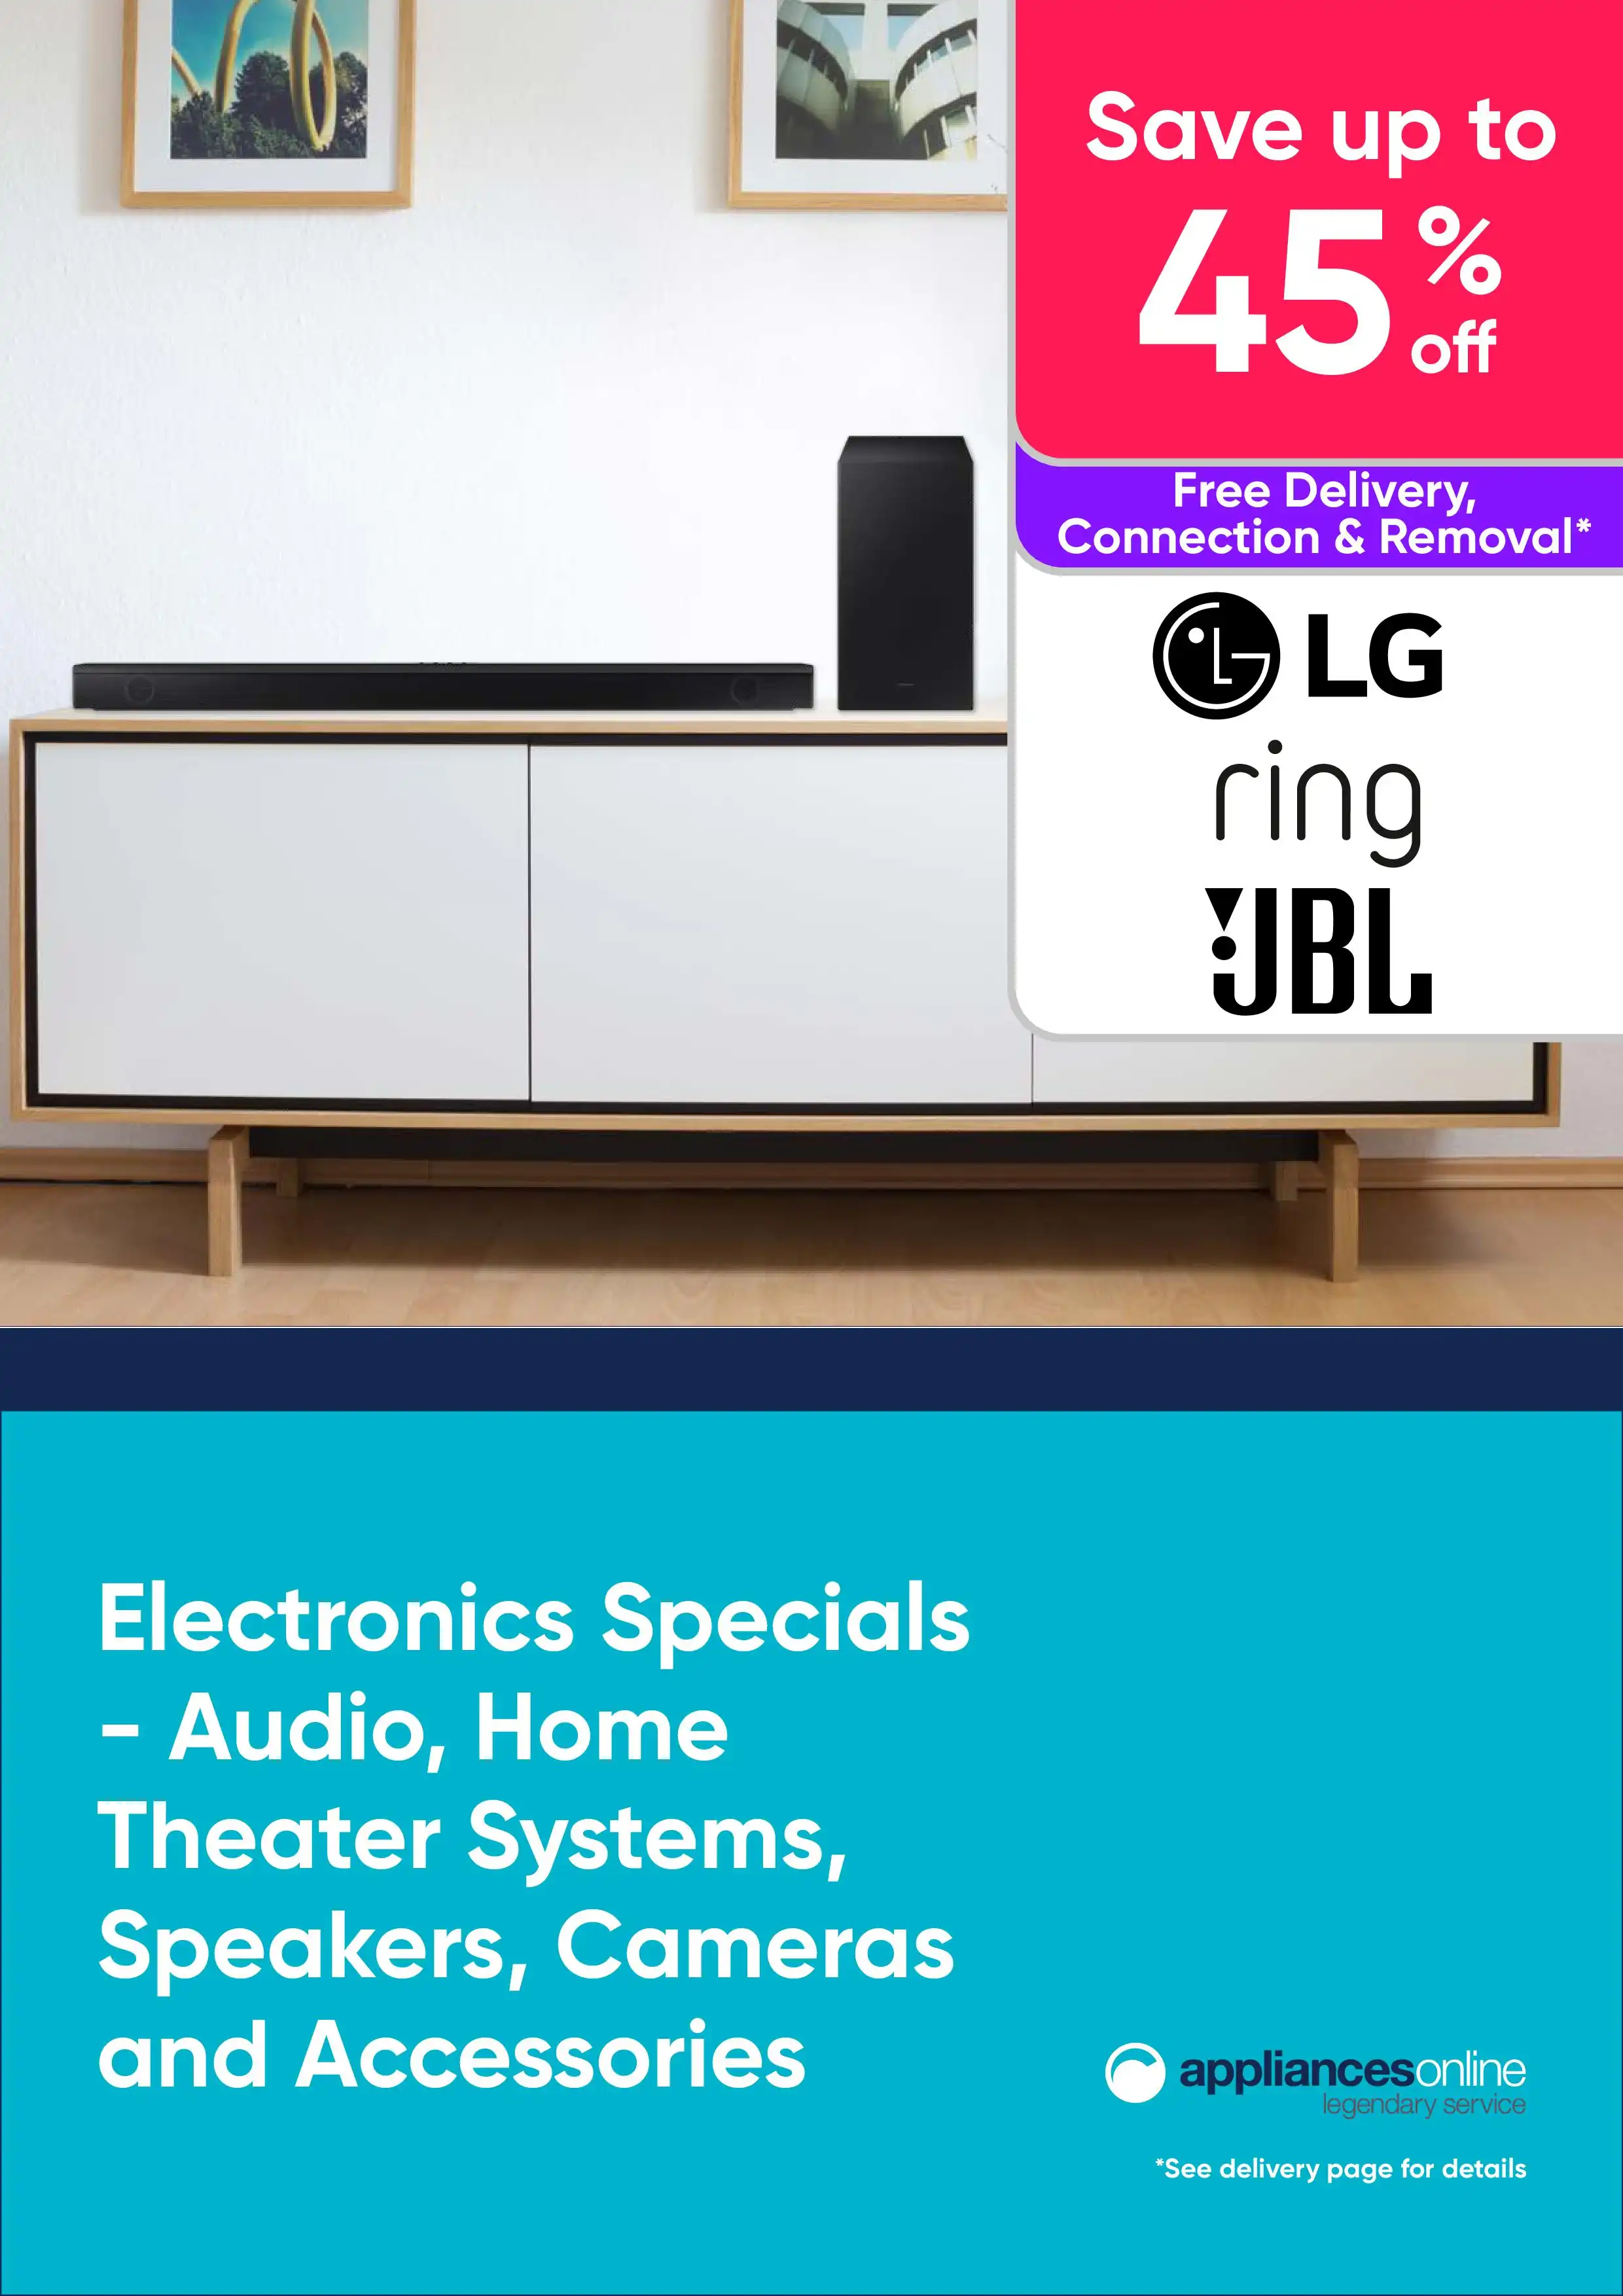 Appliances Online Electronics Specials - Save Up to 45% RRP On Audio, Cameras and Accessories